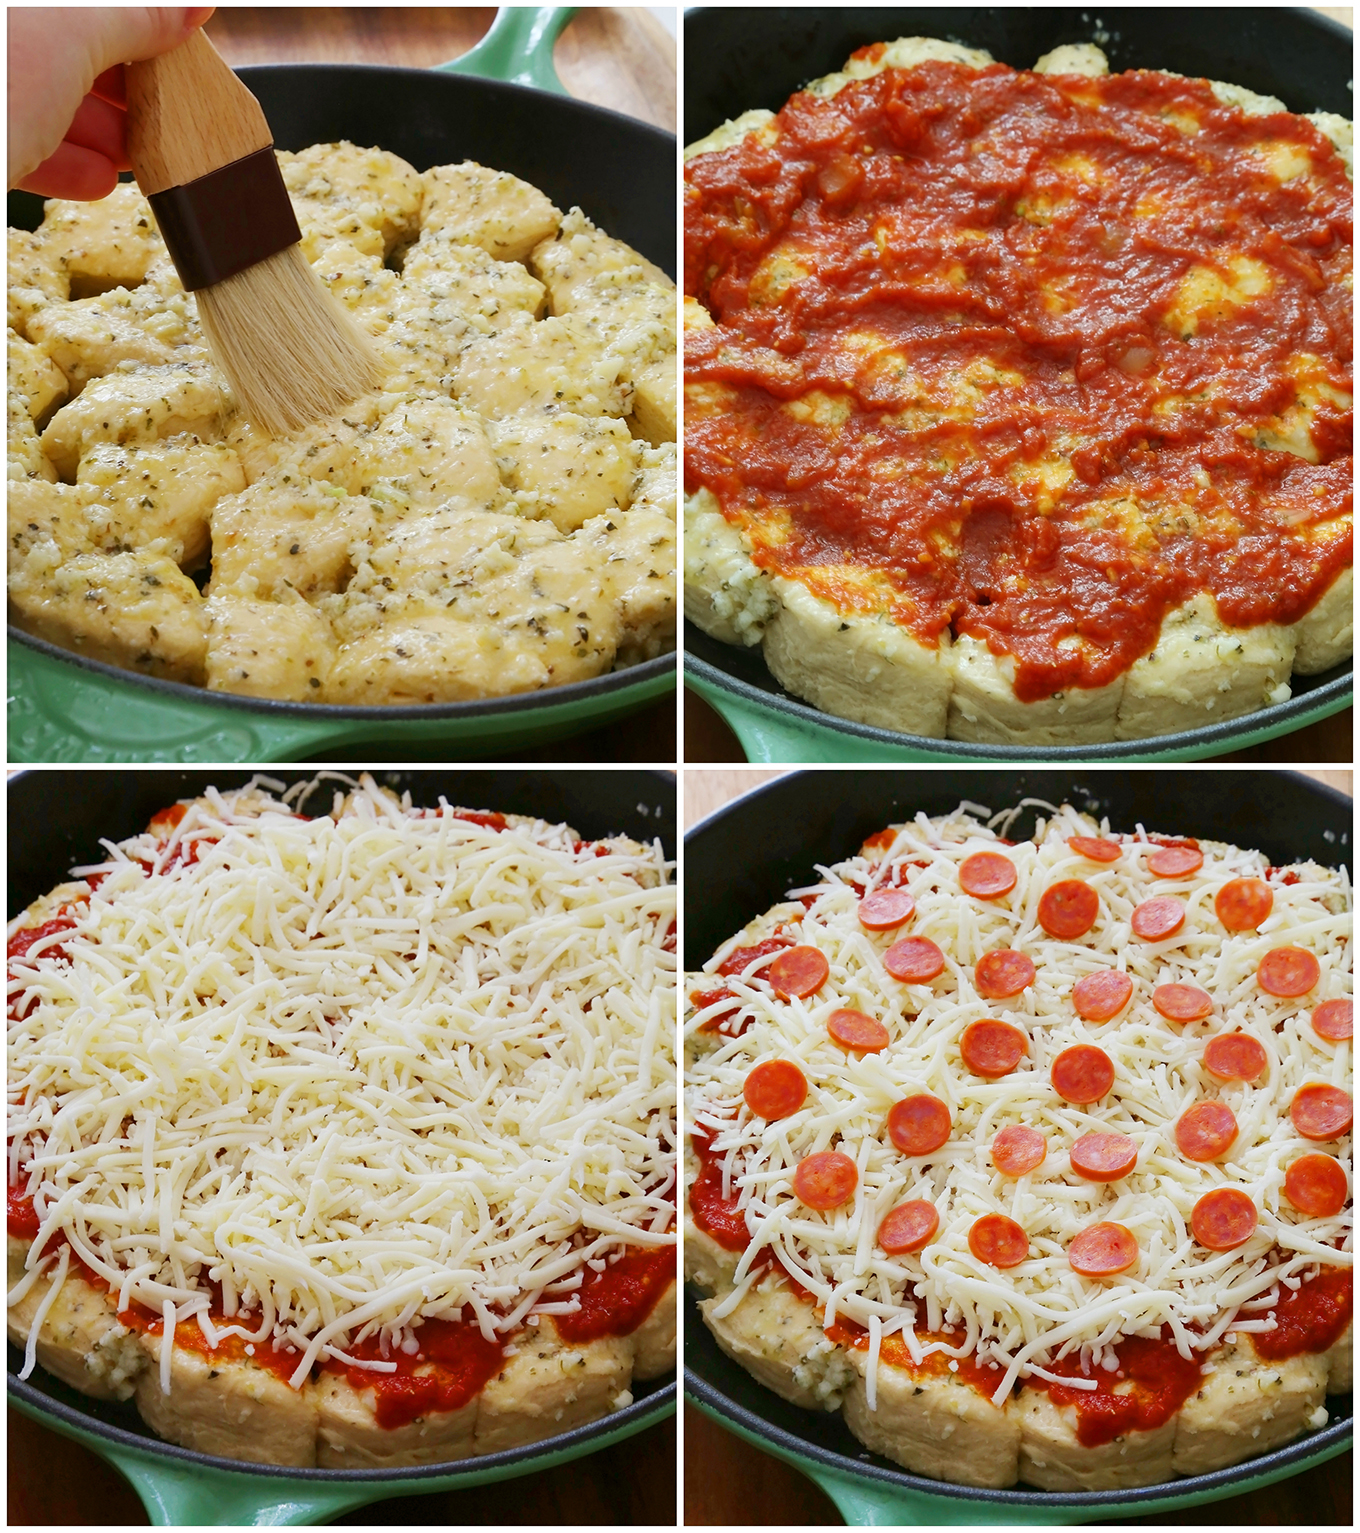 Cheesy Deep Dish Pepperoni Pizza Bites – Pull-apart cheesy pepperoni pizza bread, made easily with biscuits! Add fave toppings and serve for game day, or family nights! thecomfortofcooking.com